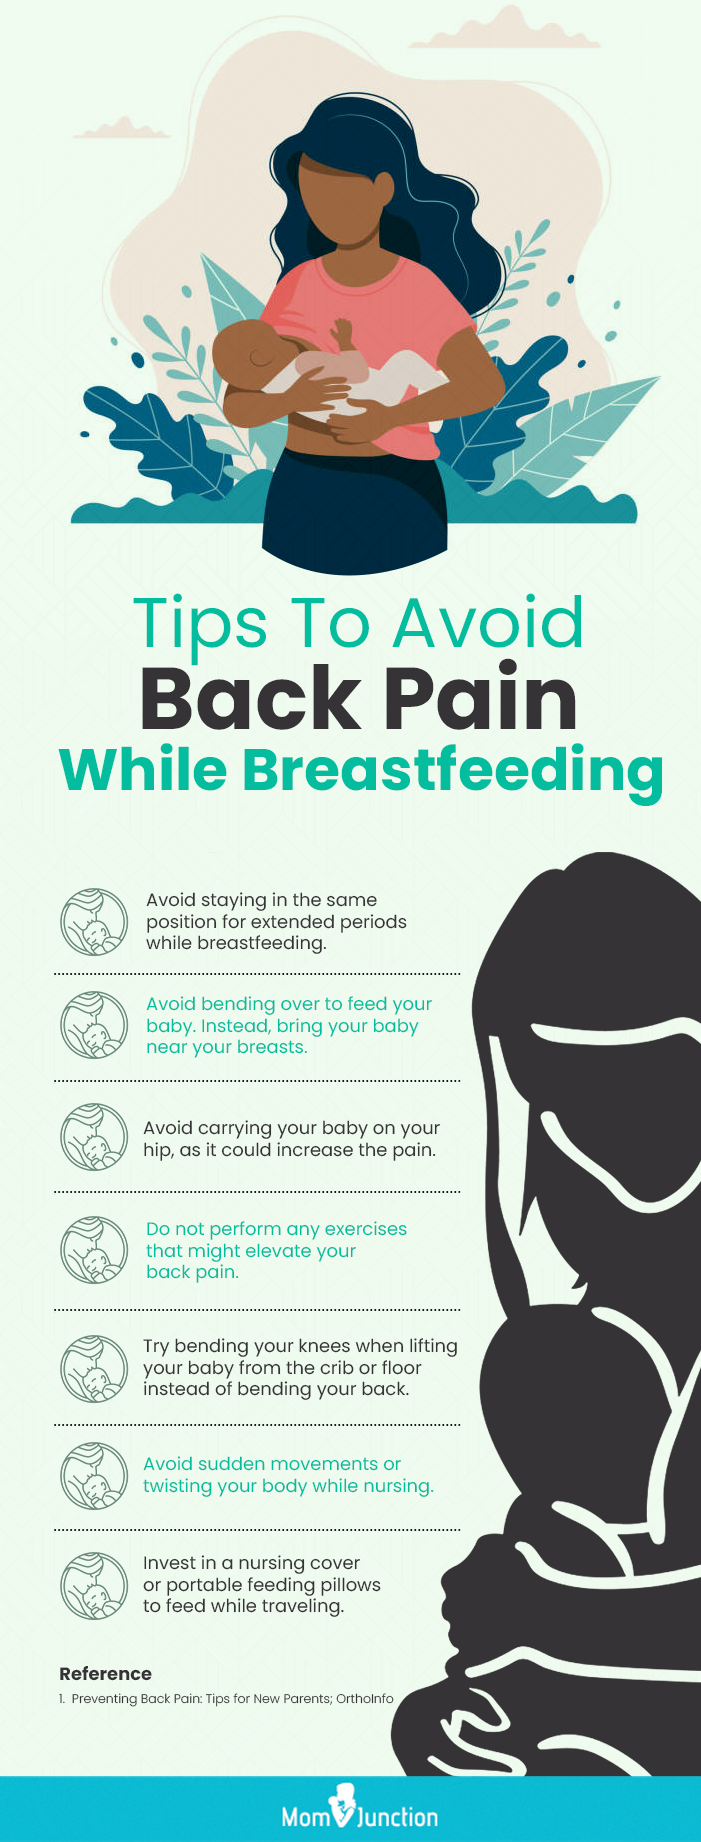 tips to avoid backpain while breastfeeding (infographic)